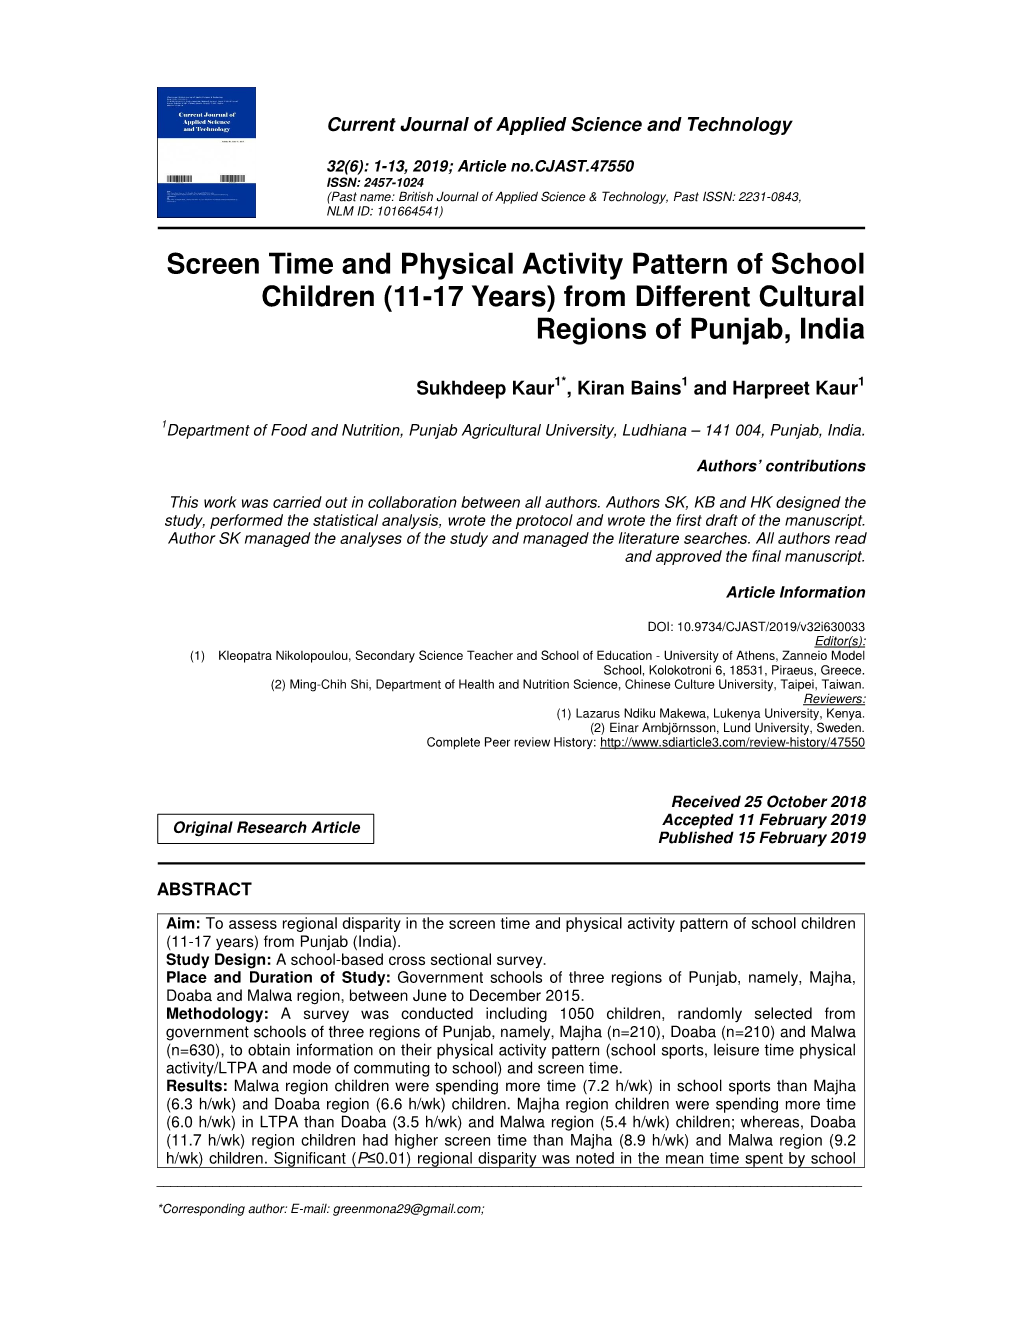 Screen Time and Physical Activity Pattern of School Children (11-17 Years) from Different Cultural Regions of Punjab, India